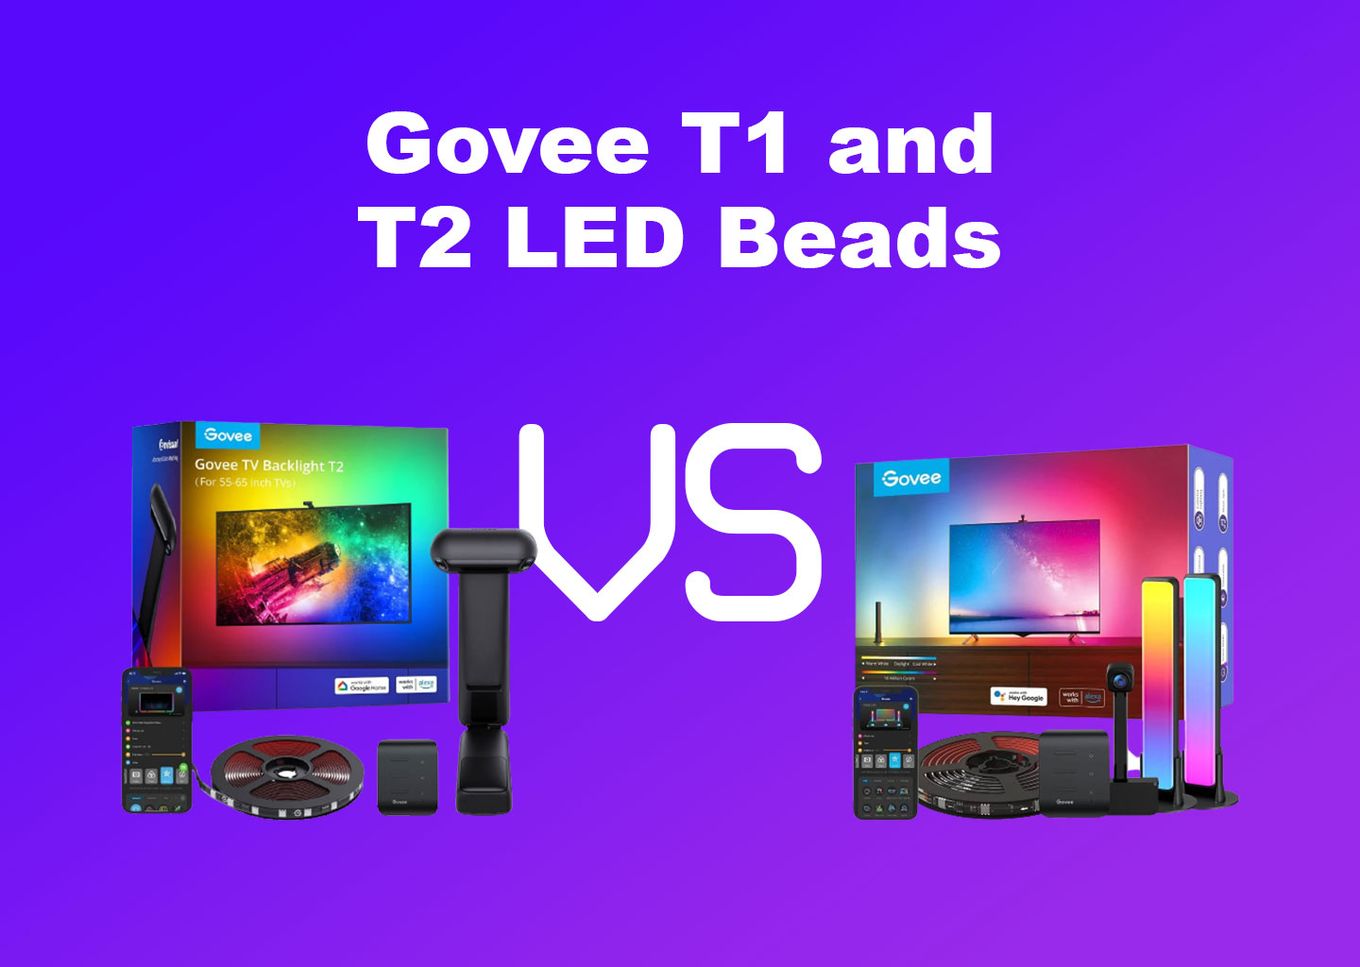 Govee T1 and T2 LED Beads